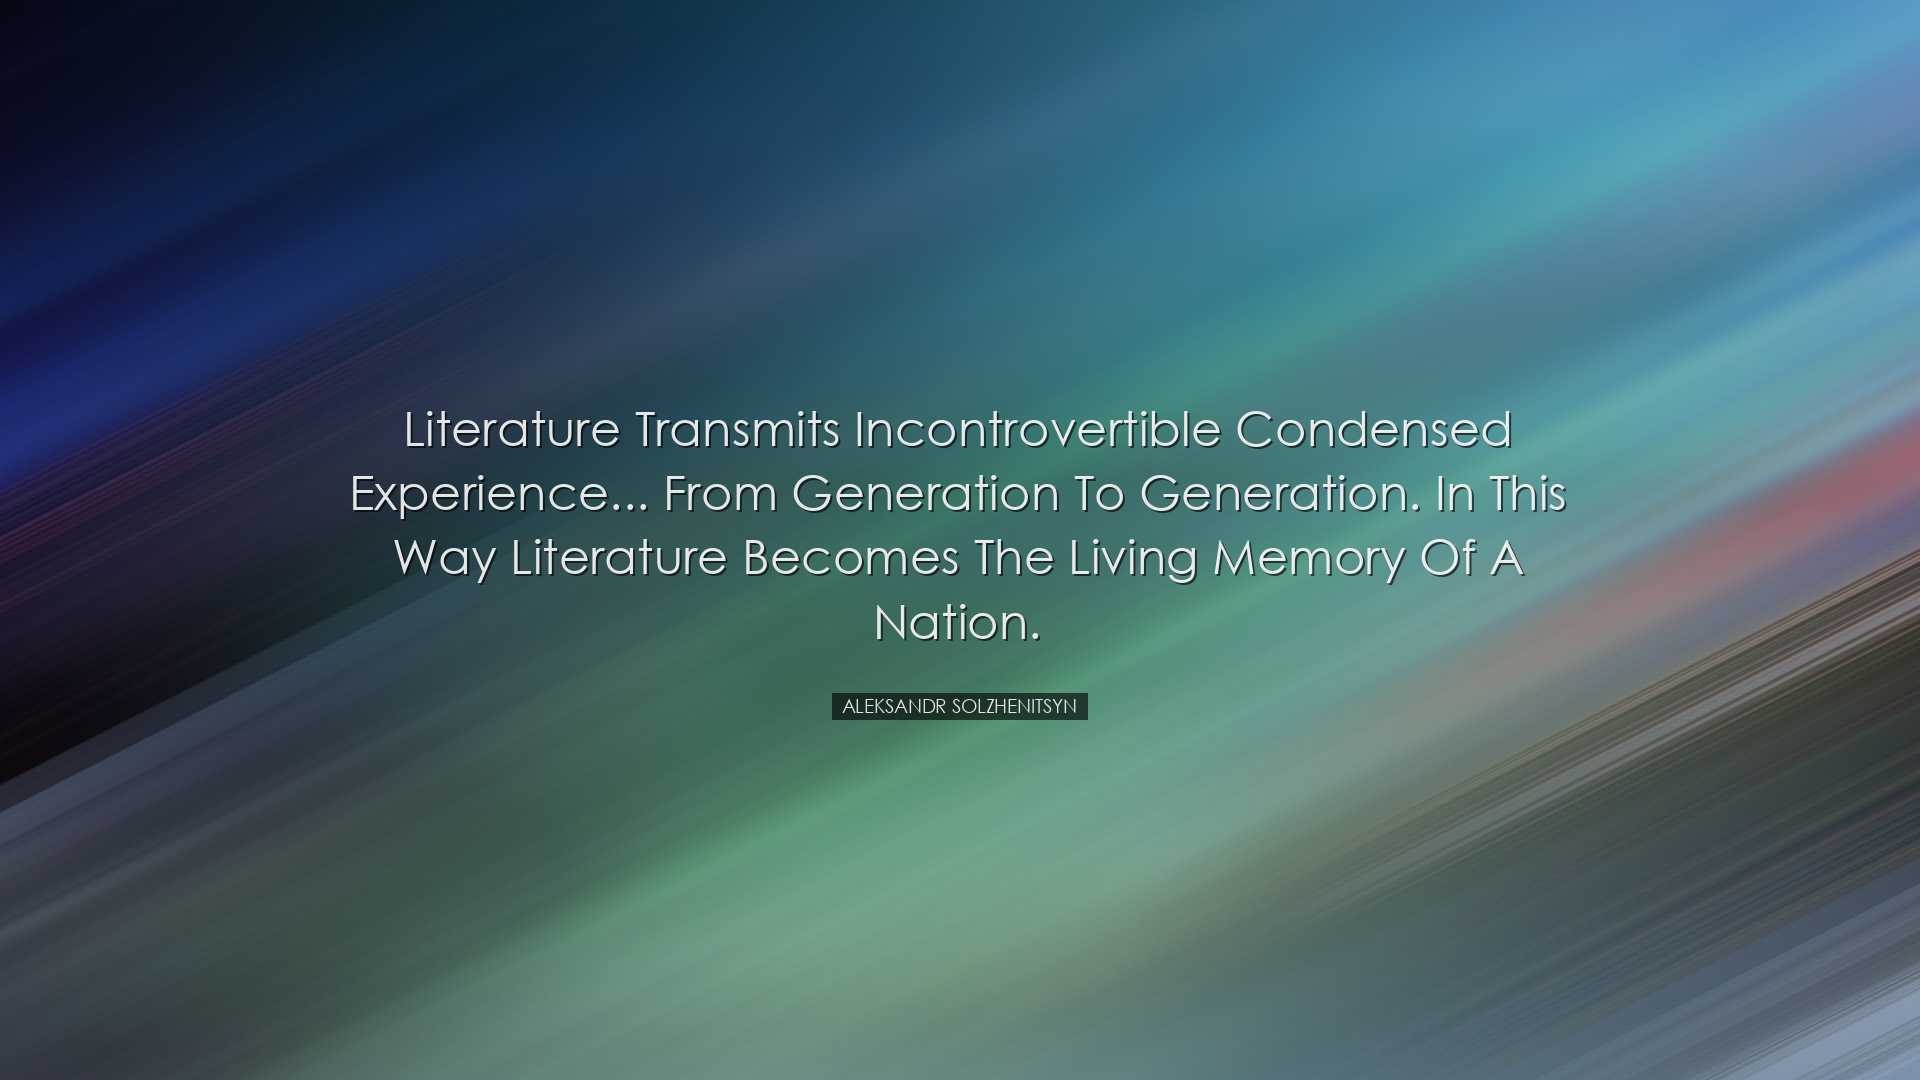 Literature transmits incontrovertible condensed experience... from